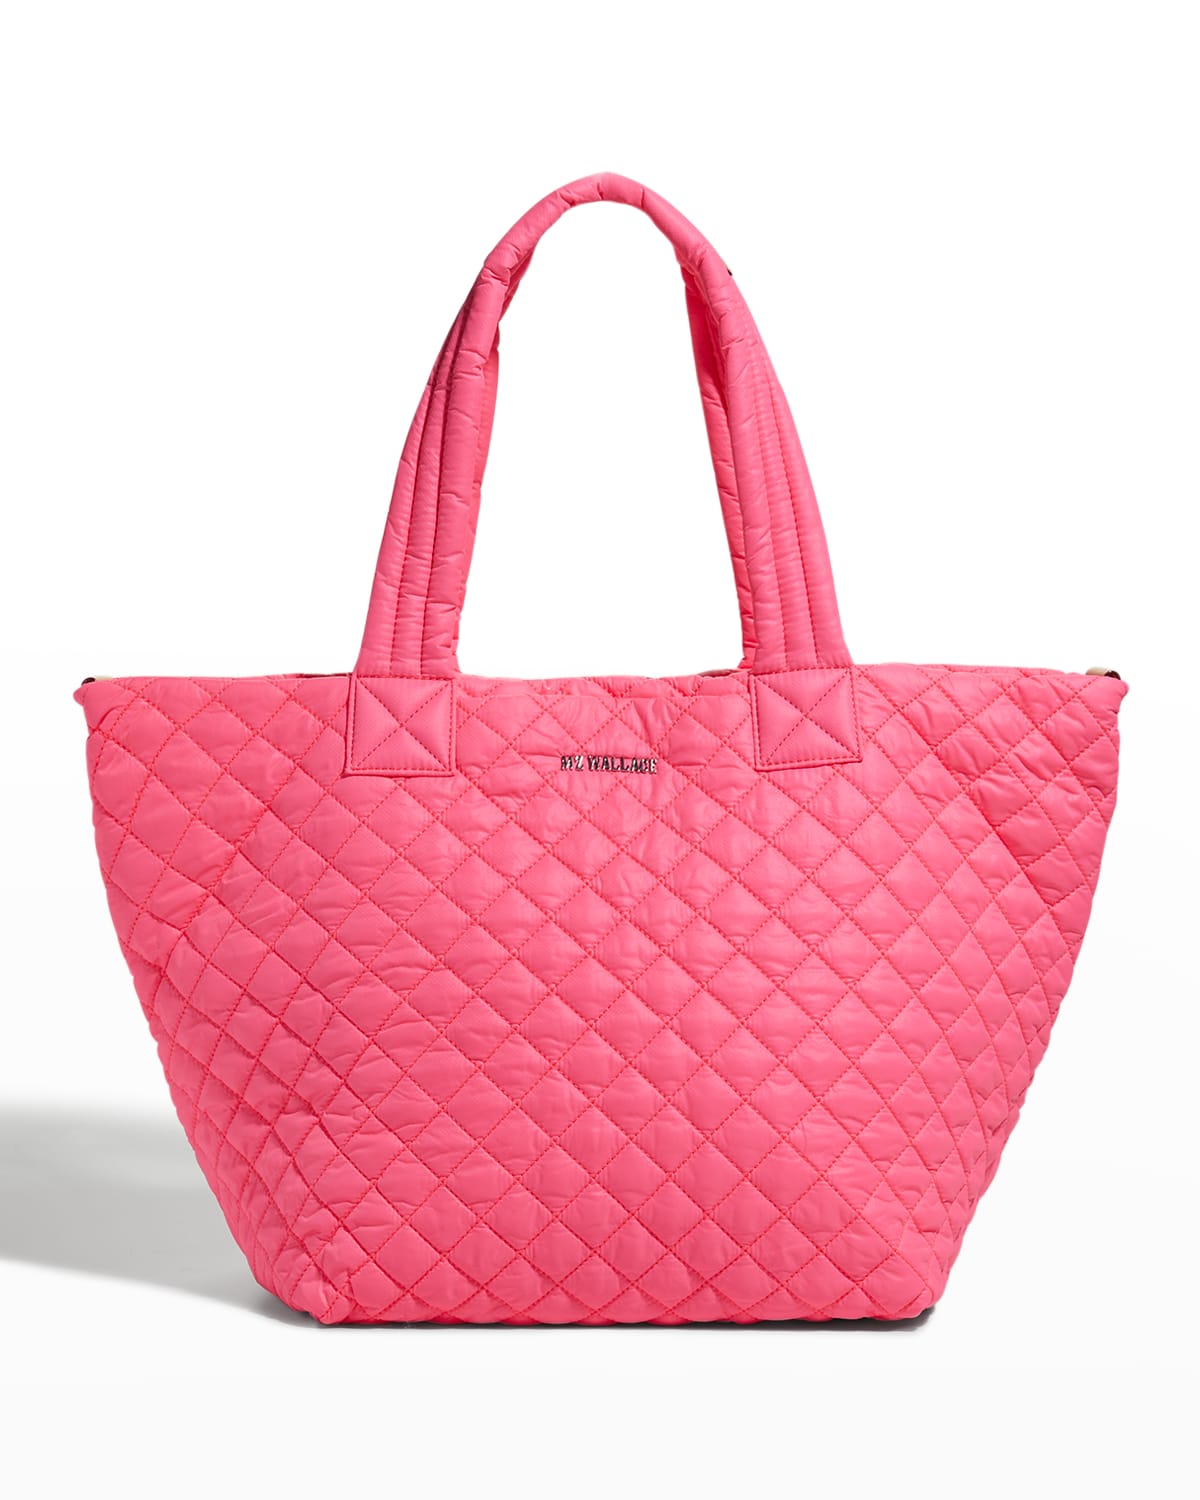 Mz Wallace Metro Deluxe Medium Quilted Nylon Tote Bag In Neon Pink/silver